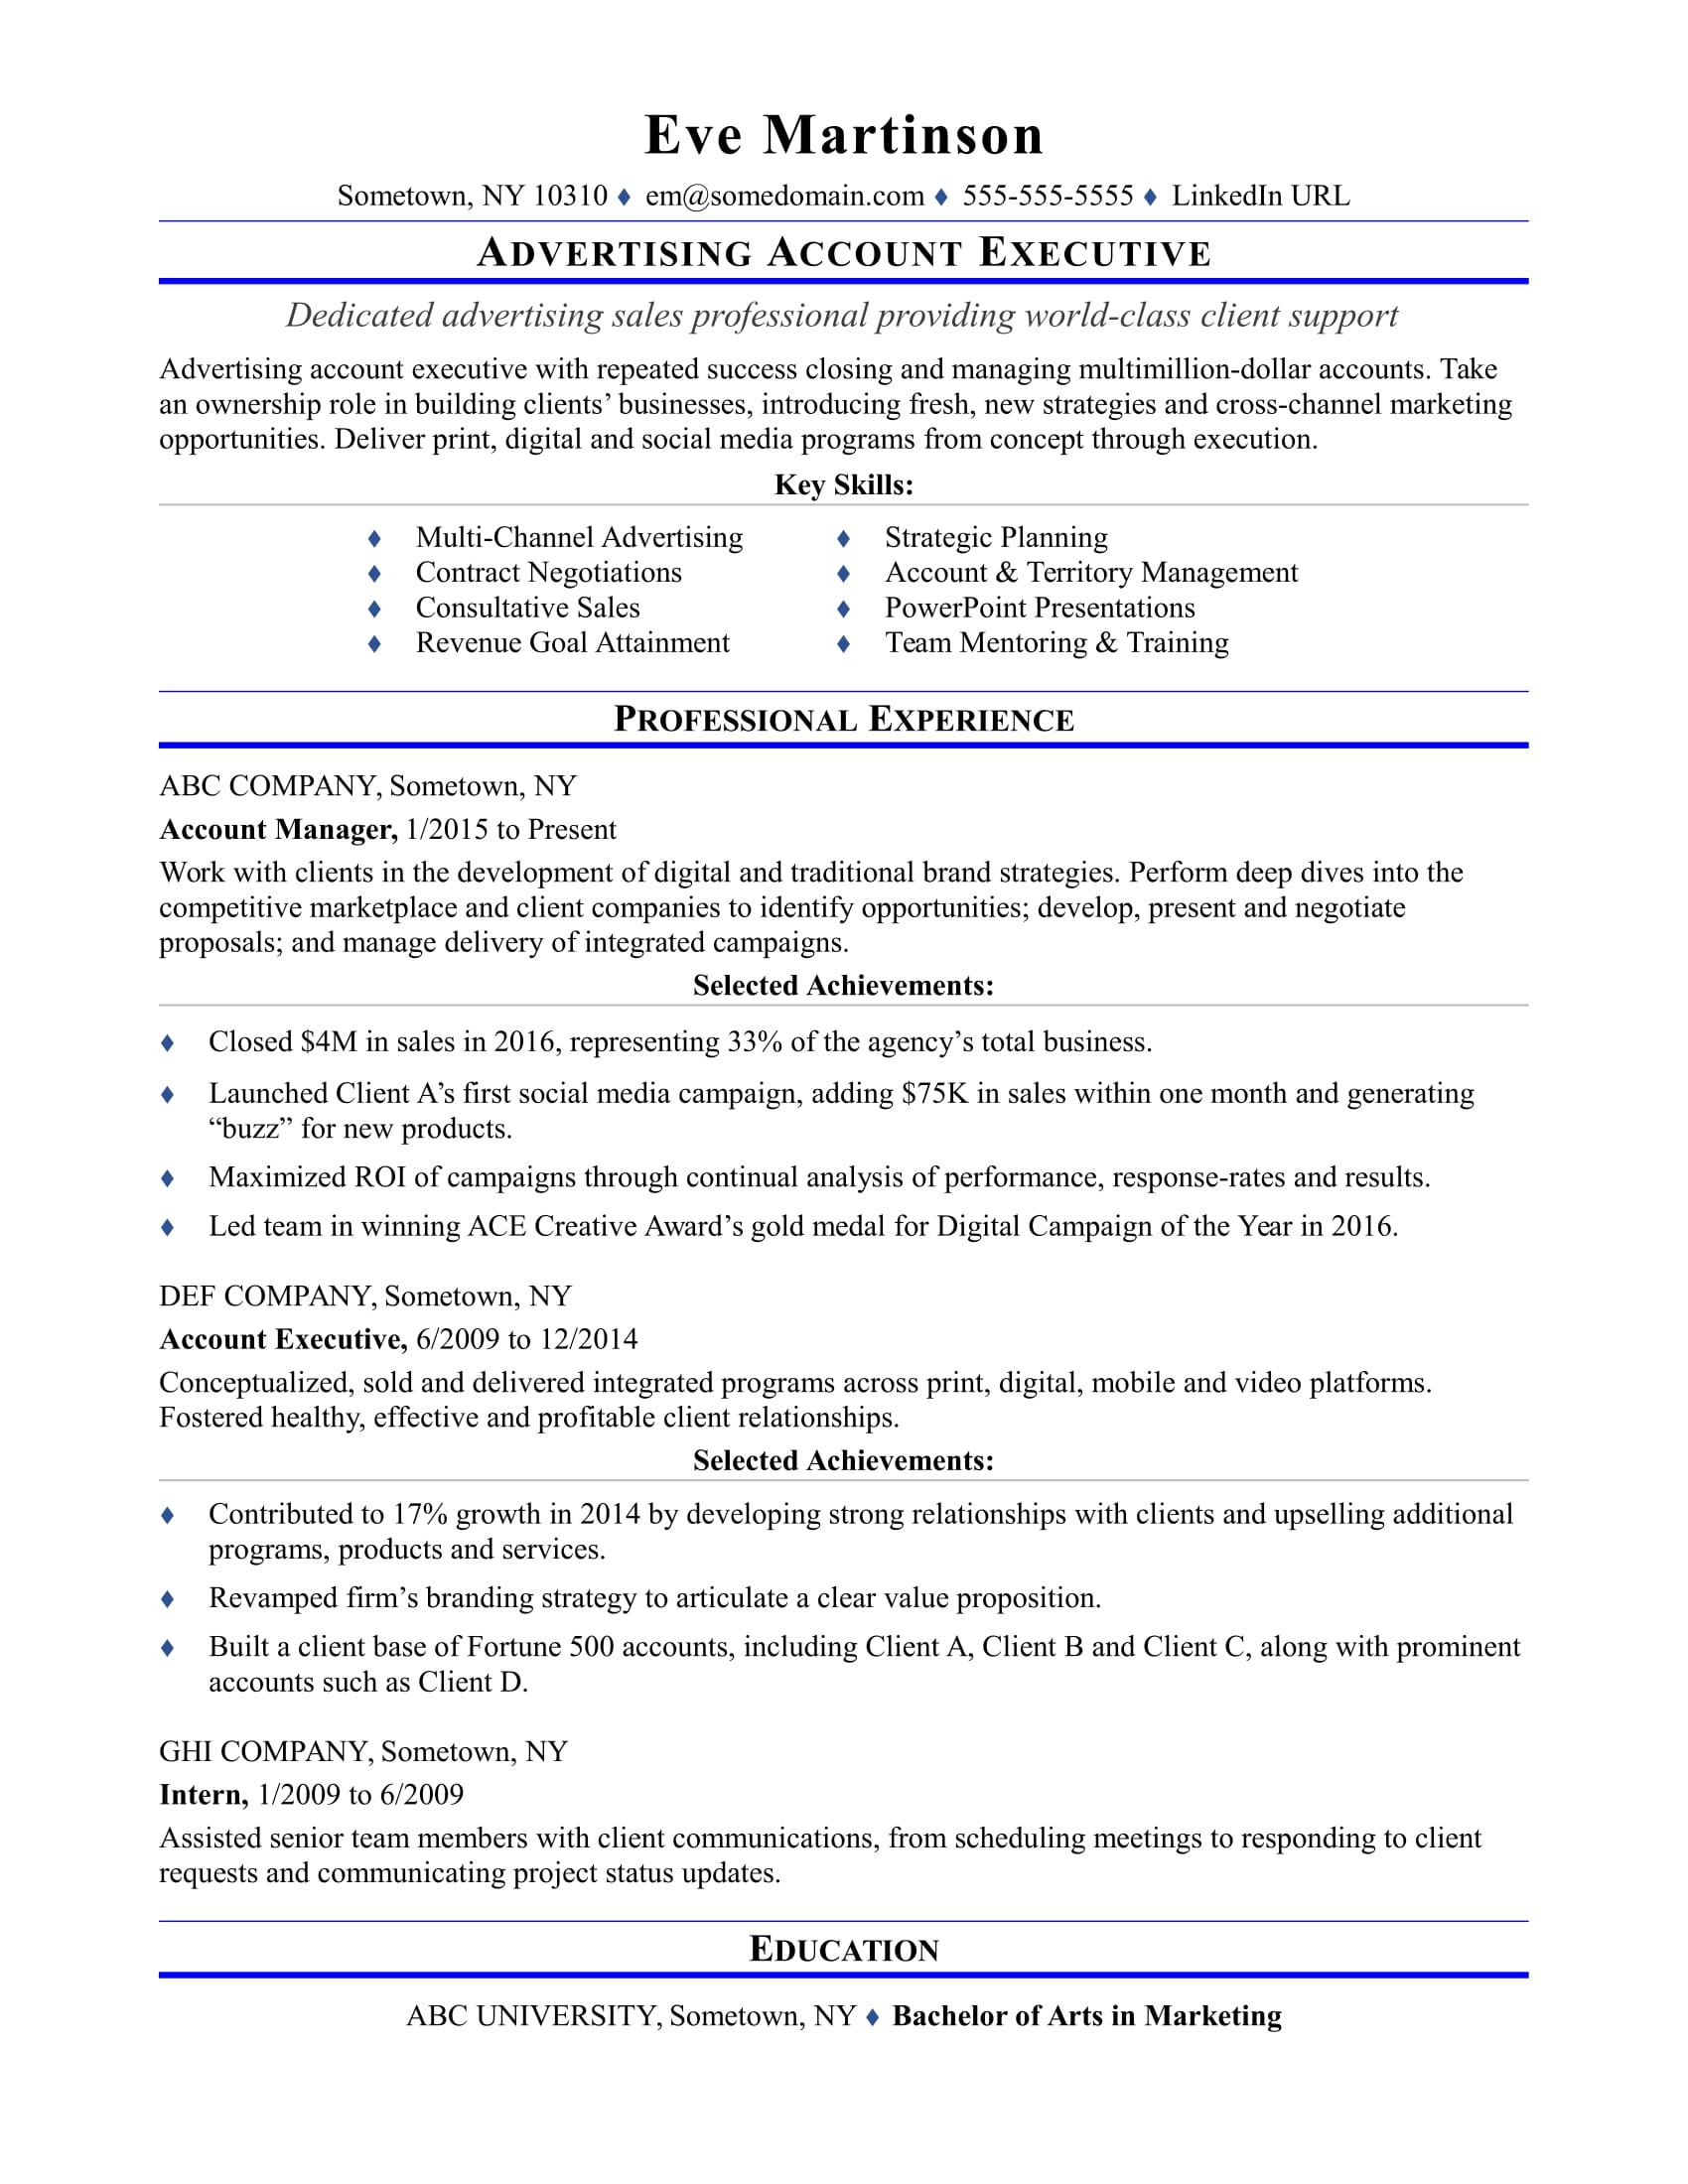 Sample Resume for Experienced Candidates In Marketing Sample Resume for An Advertising Account Executive Monster.com